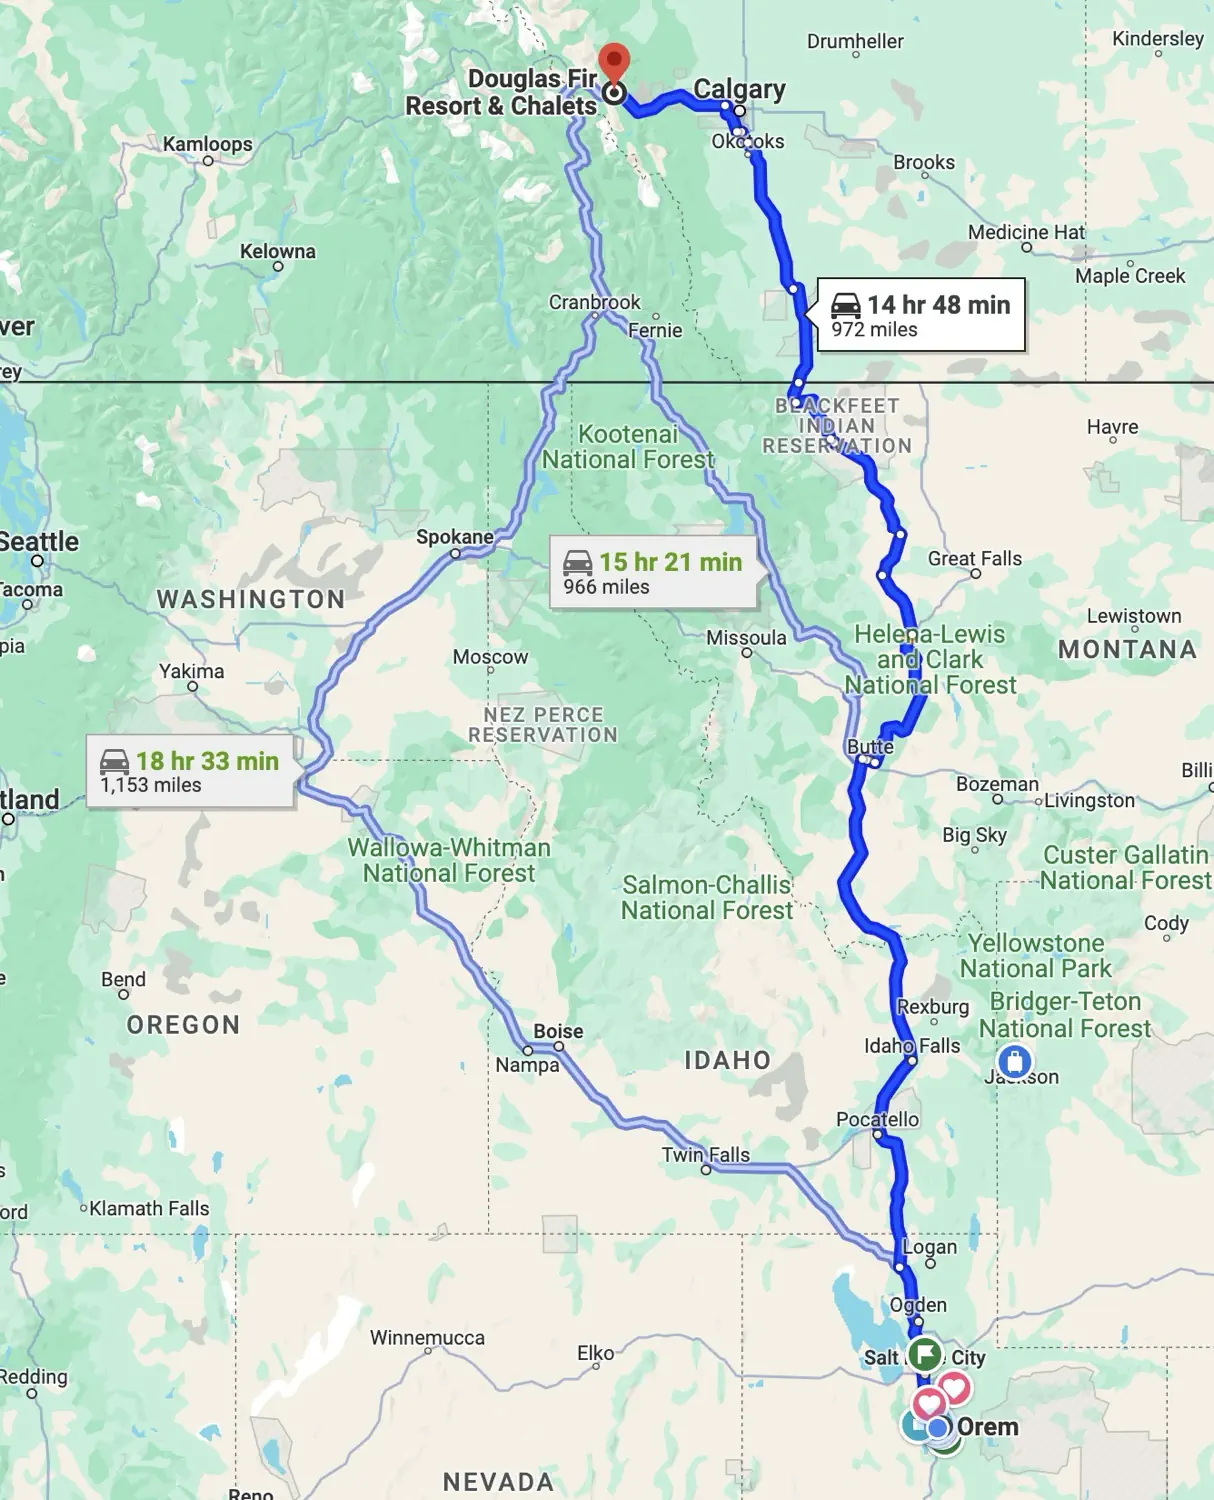 Our planned driving route from Orem, UT to Banff, AB